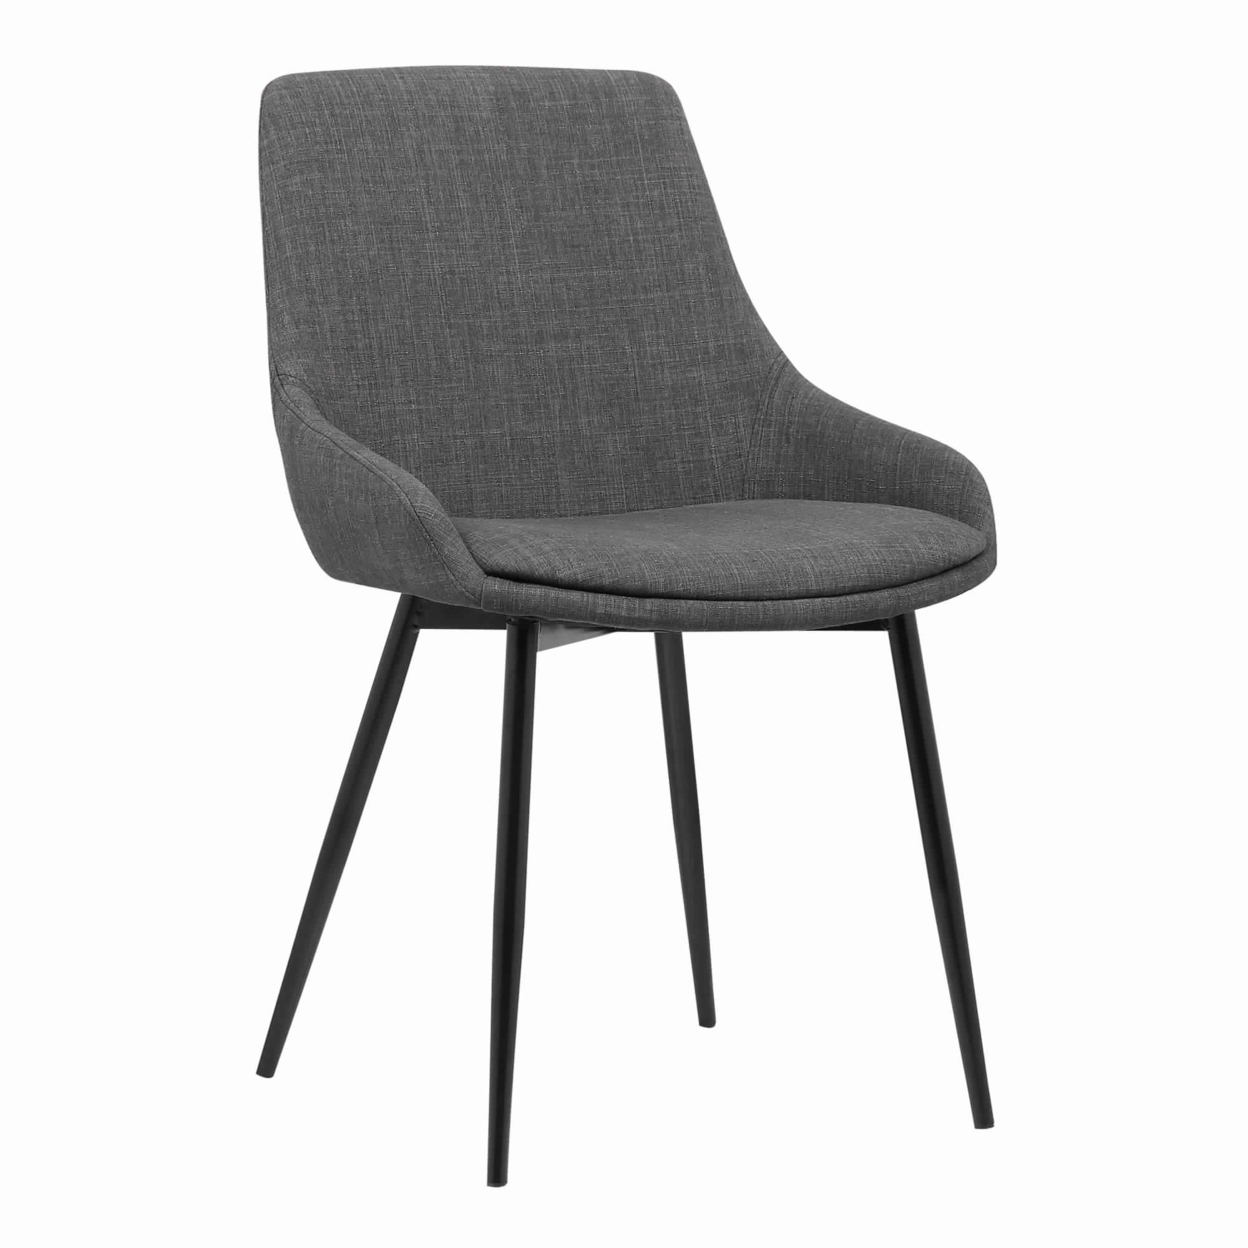 Fabric Upholstered Dining Chair With Metal Legs, Black And Gray- Saltoro Sherpi